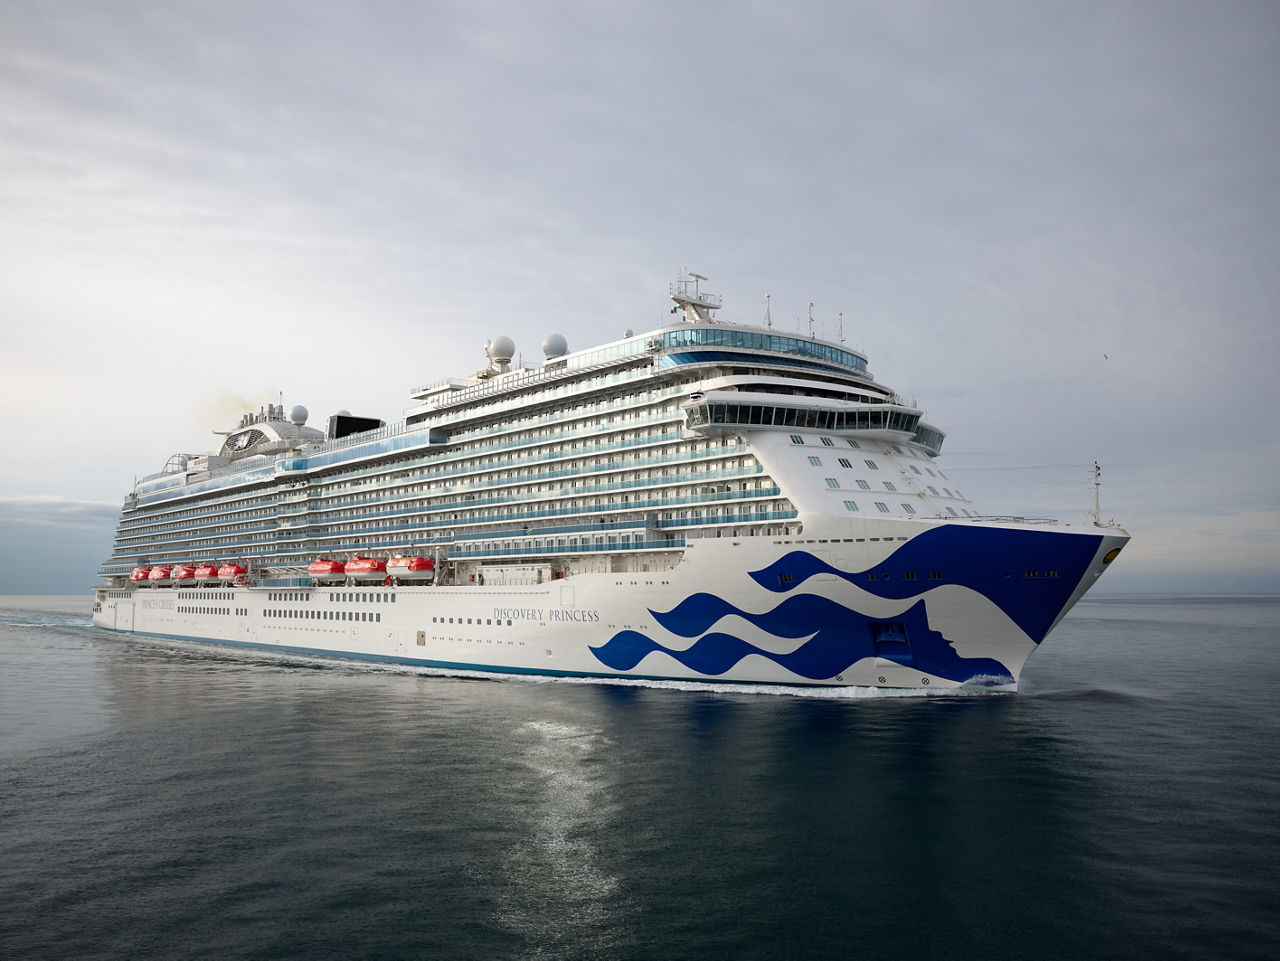 Princess Cruises Announces 2025-26 Australia u0026 New Zealand Season Featuring  the Debut of Discovery Princess u0026 the Longest World Cruise Ever to Sail  from Down Under - Princess Cruises